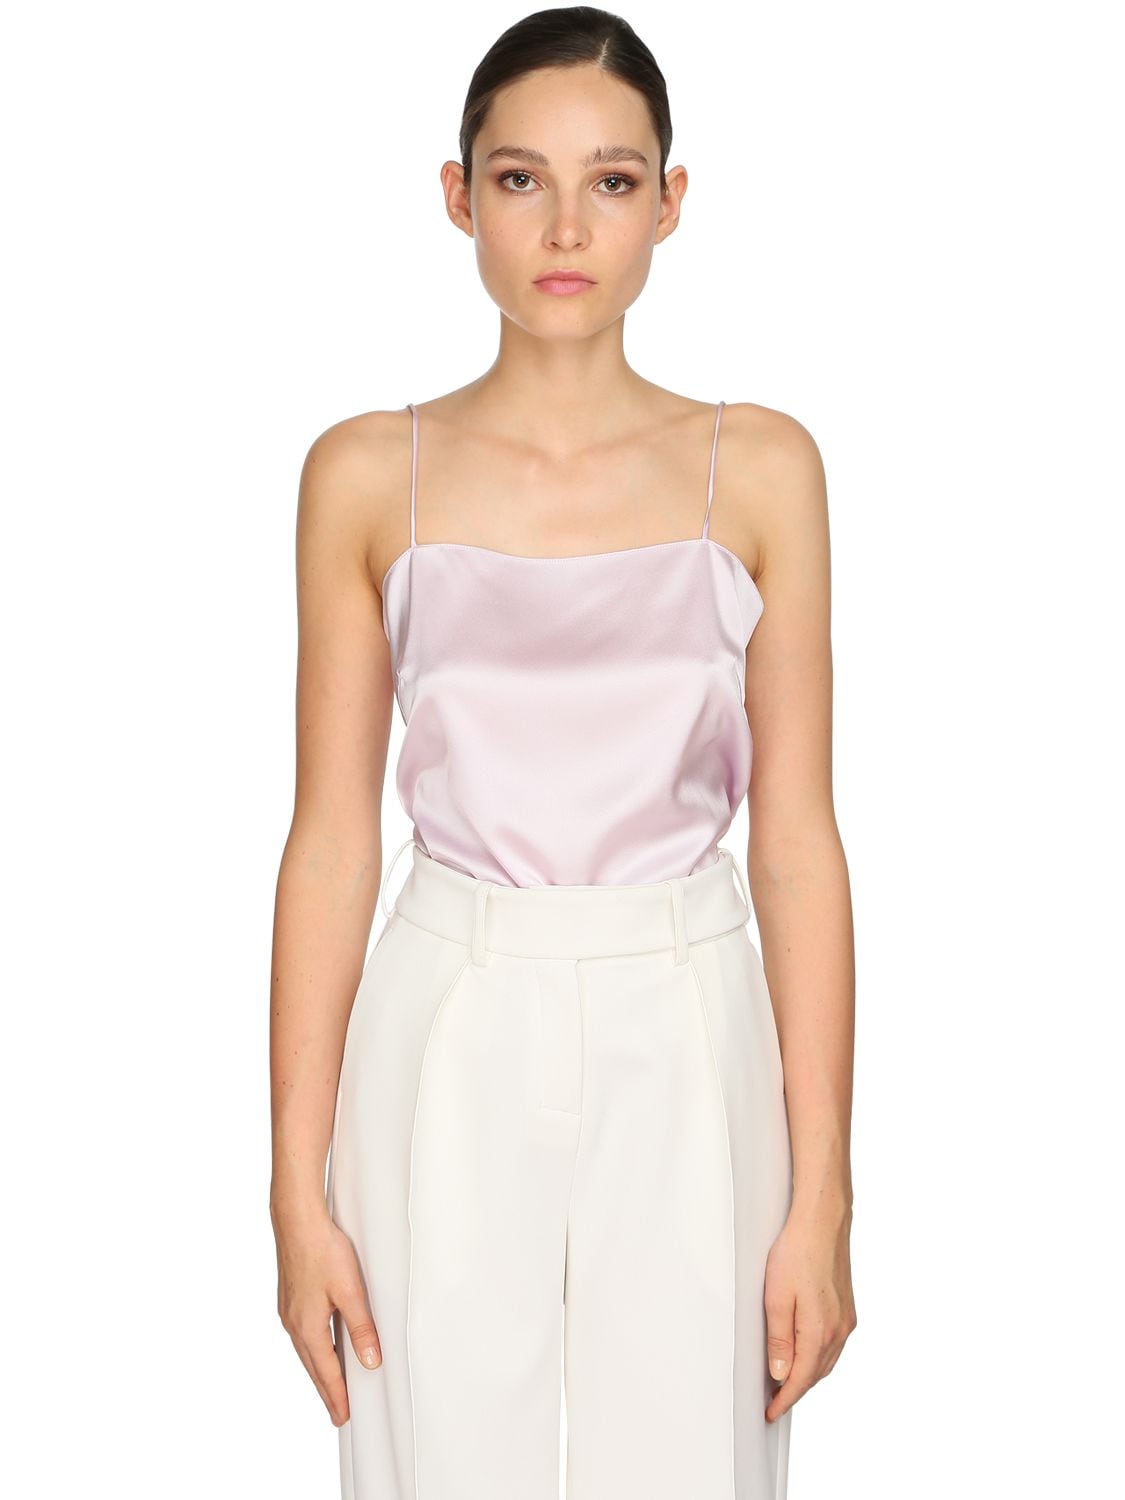 ALEXANDRE VAUTHIER STRETCH SATIN CAMISOLE TOP,71I5BH050-UELOSW2